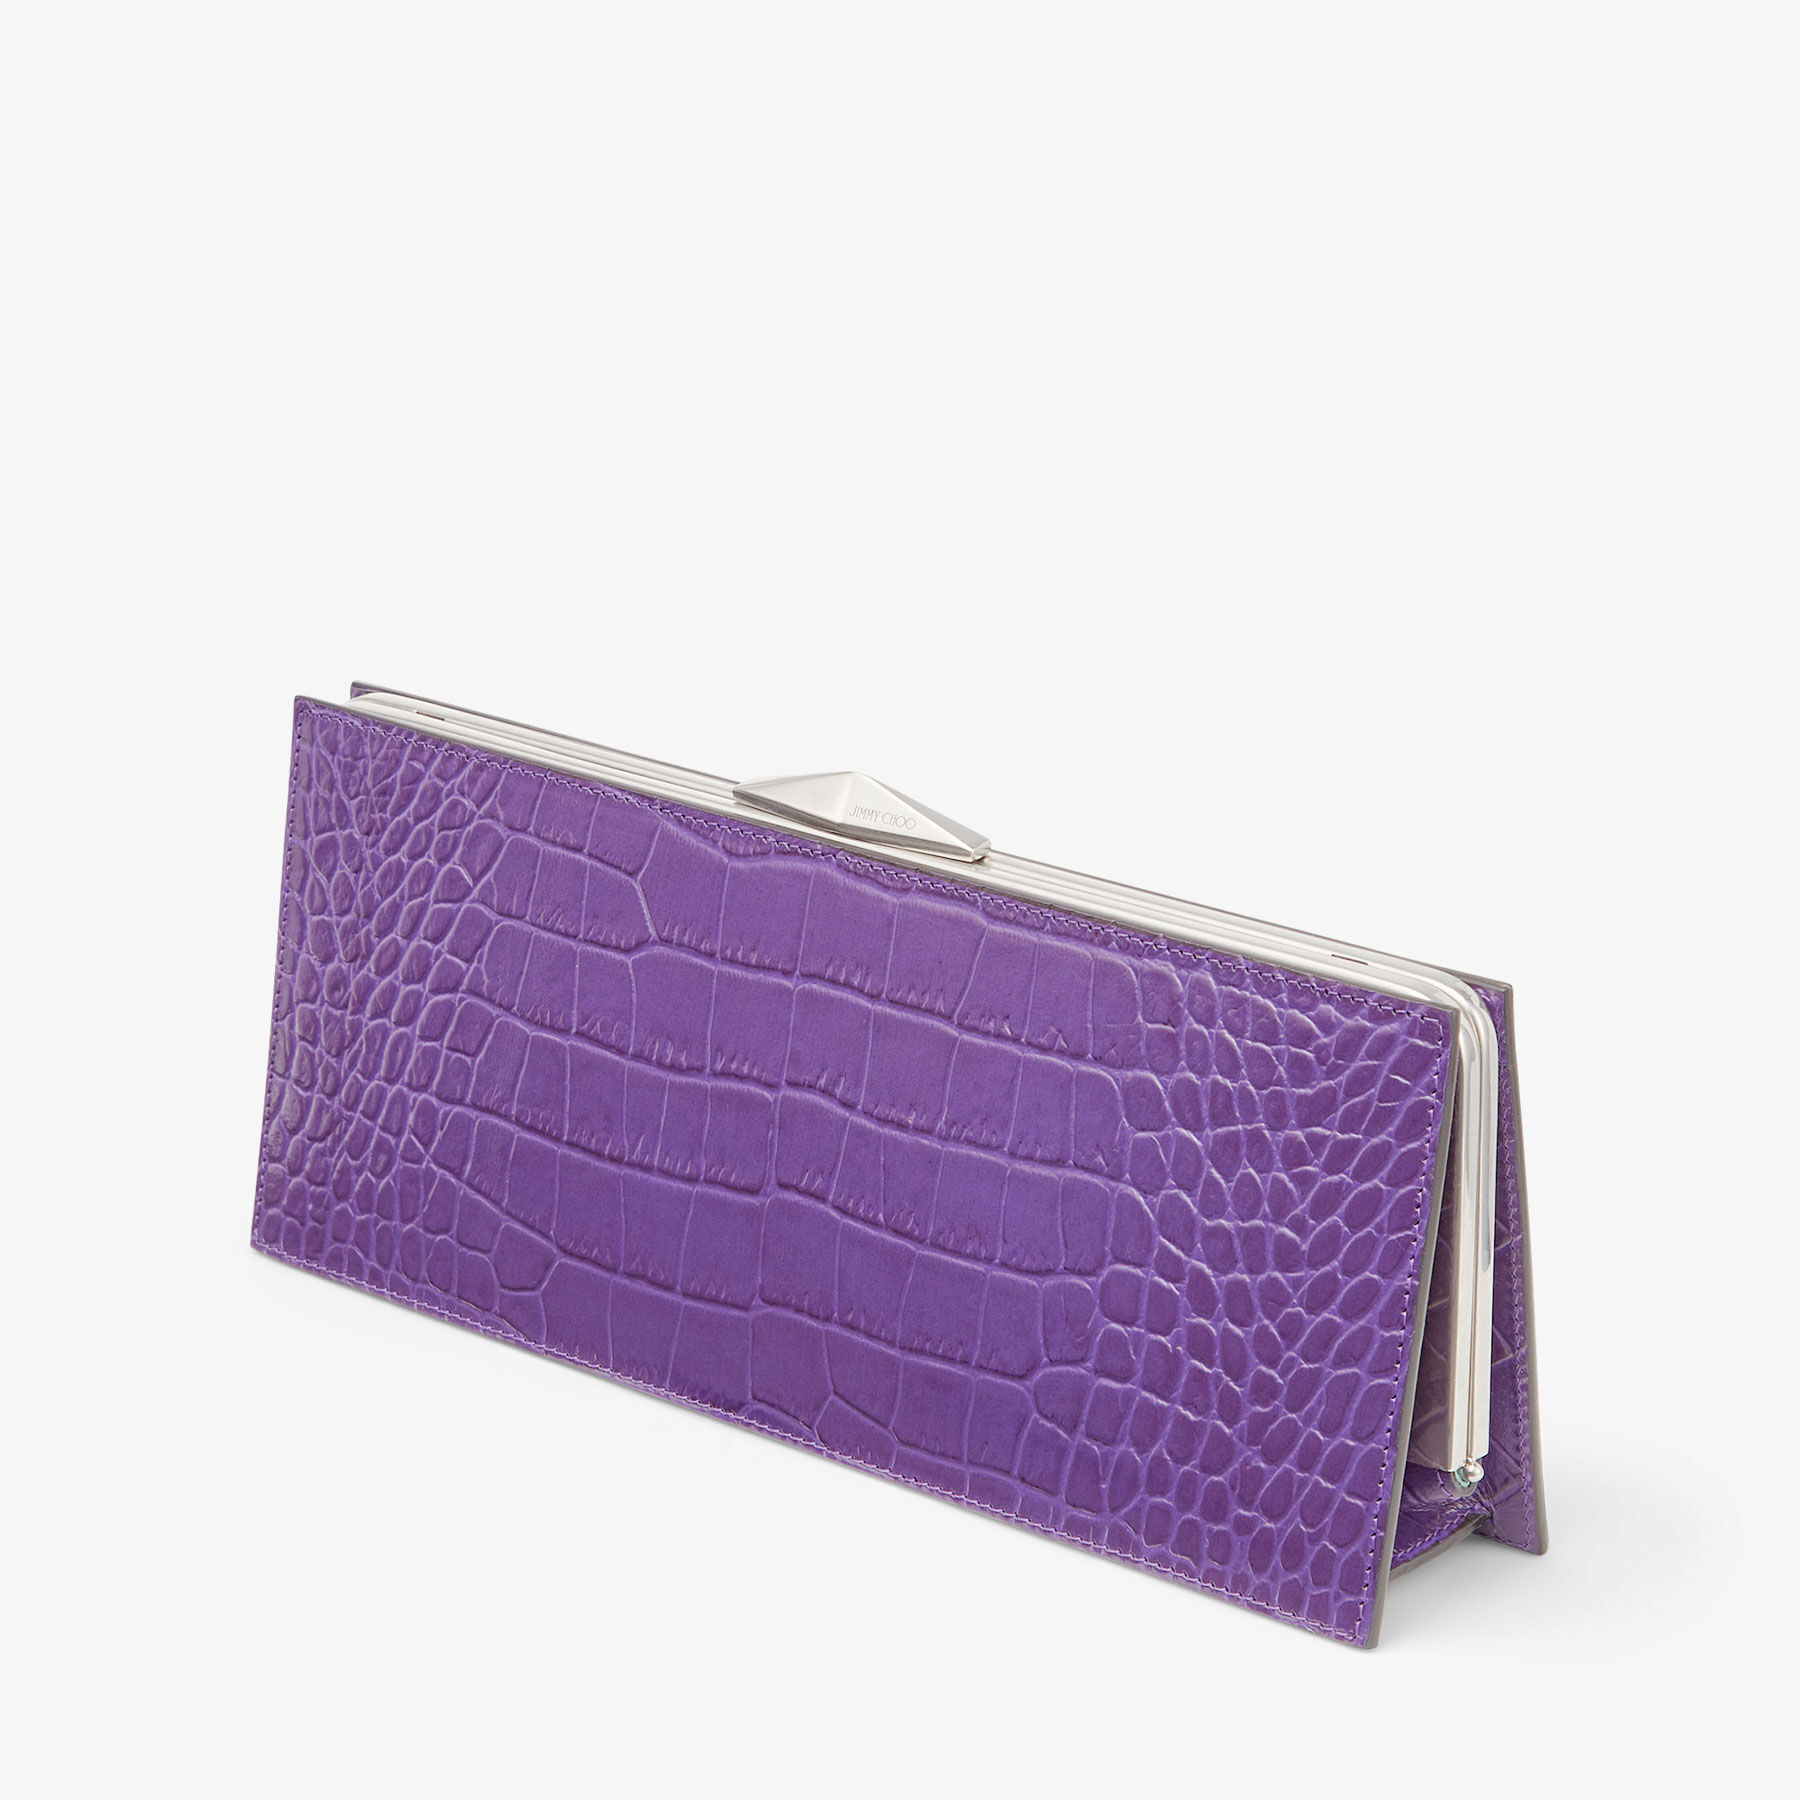 DIAMOND COCKTAIL | Cassis Croc-Embossed Leather Cocktail Clutch 